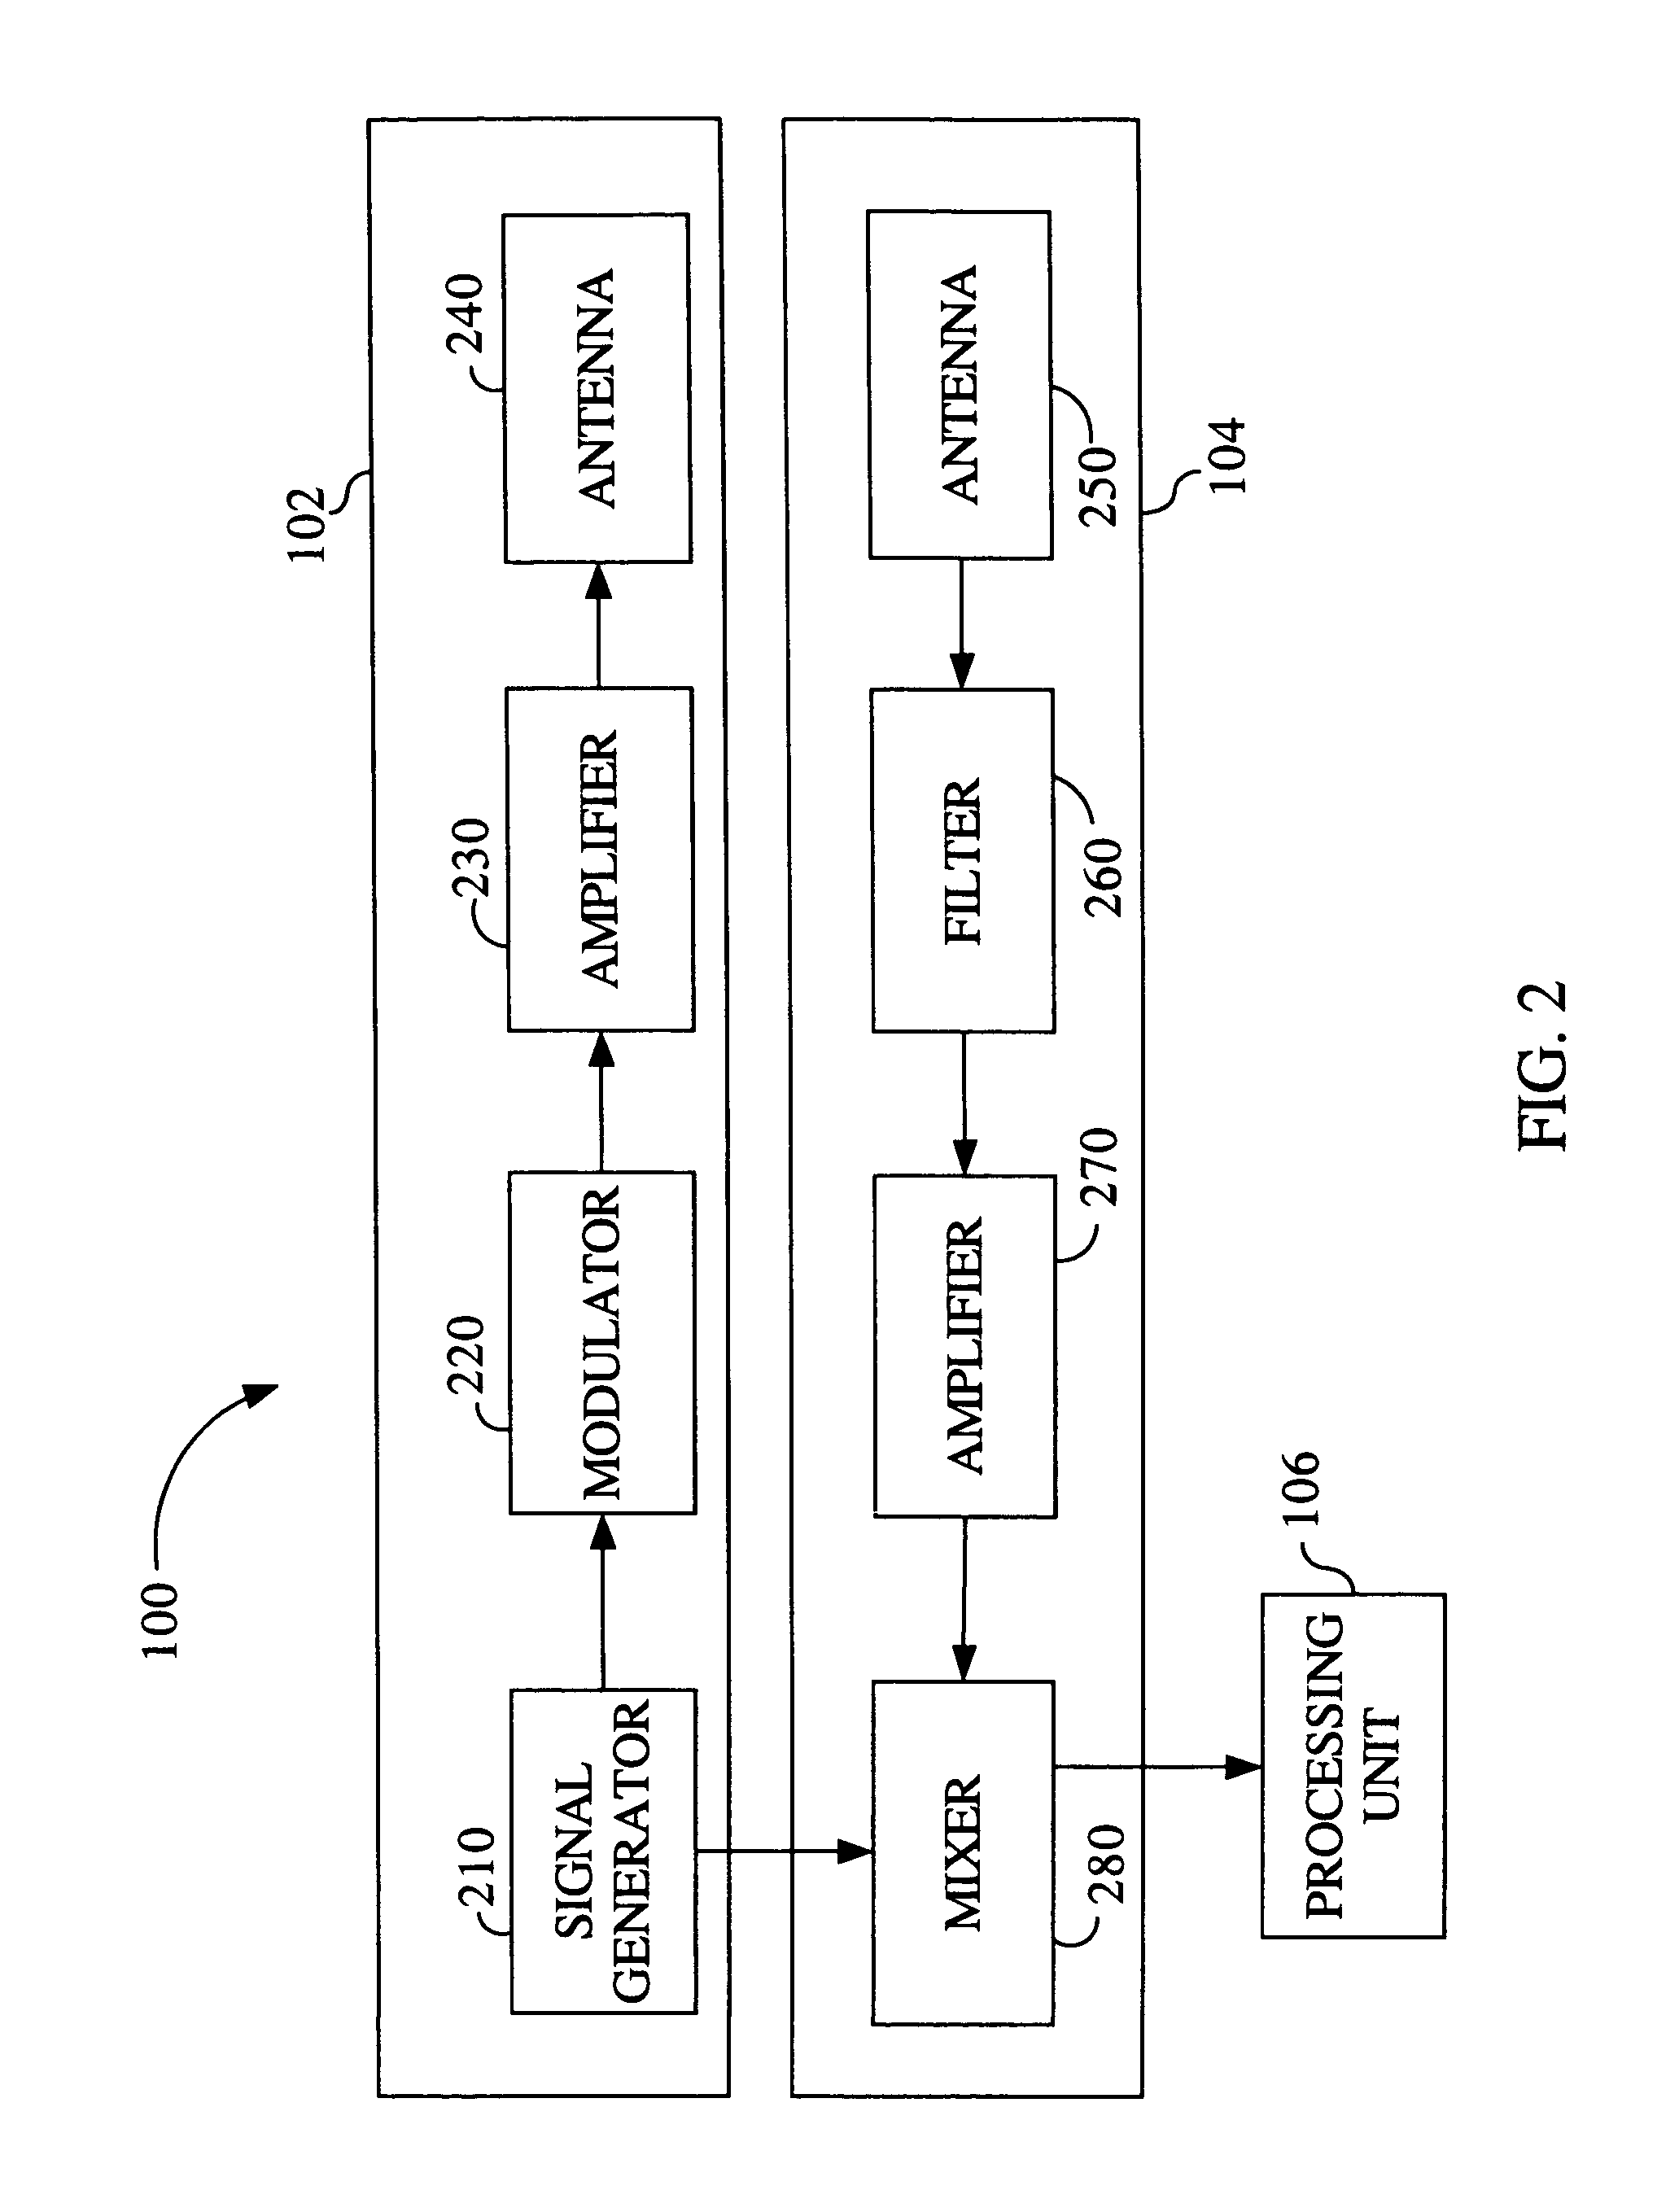 System and method for detecting receivers